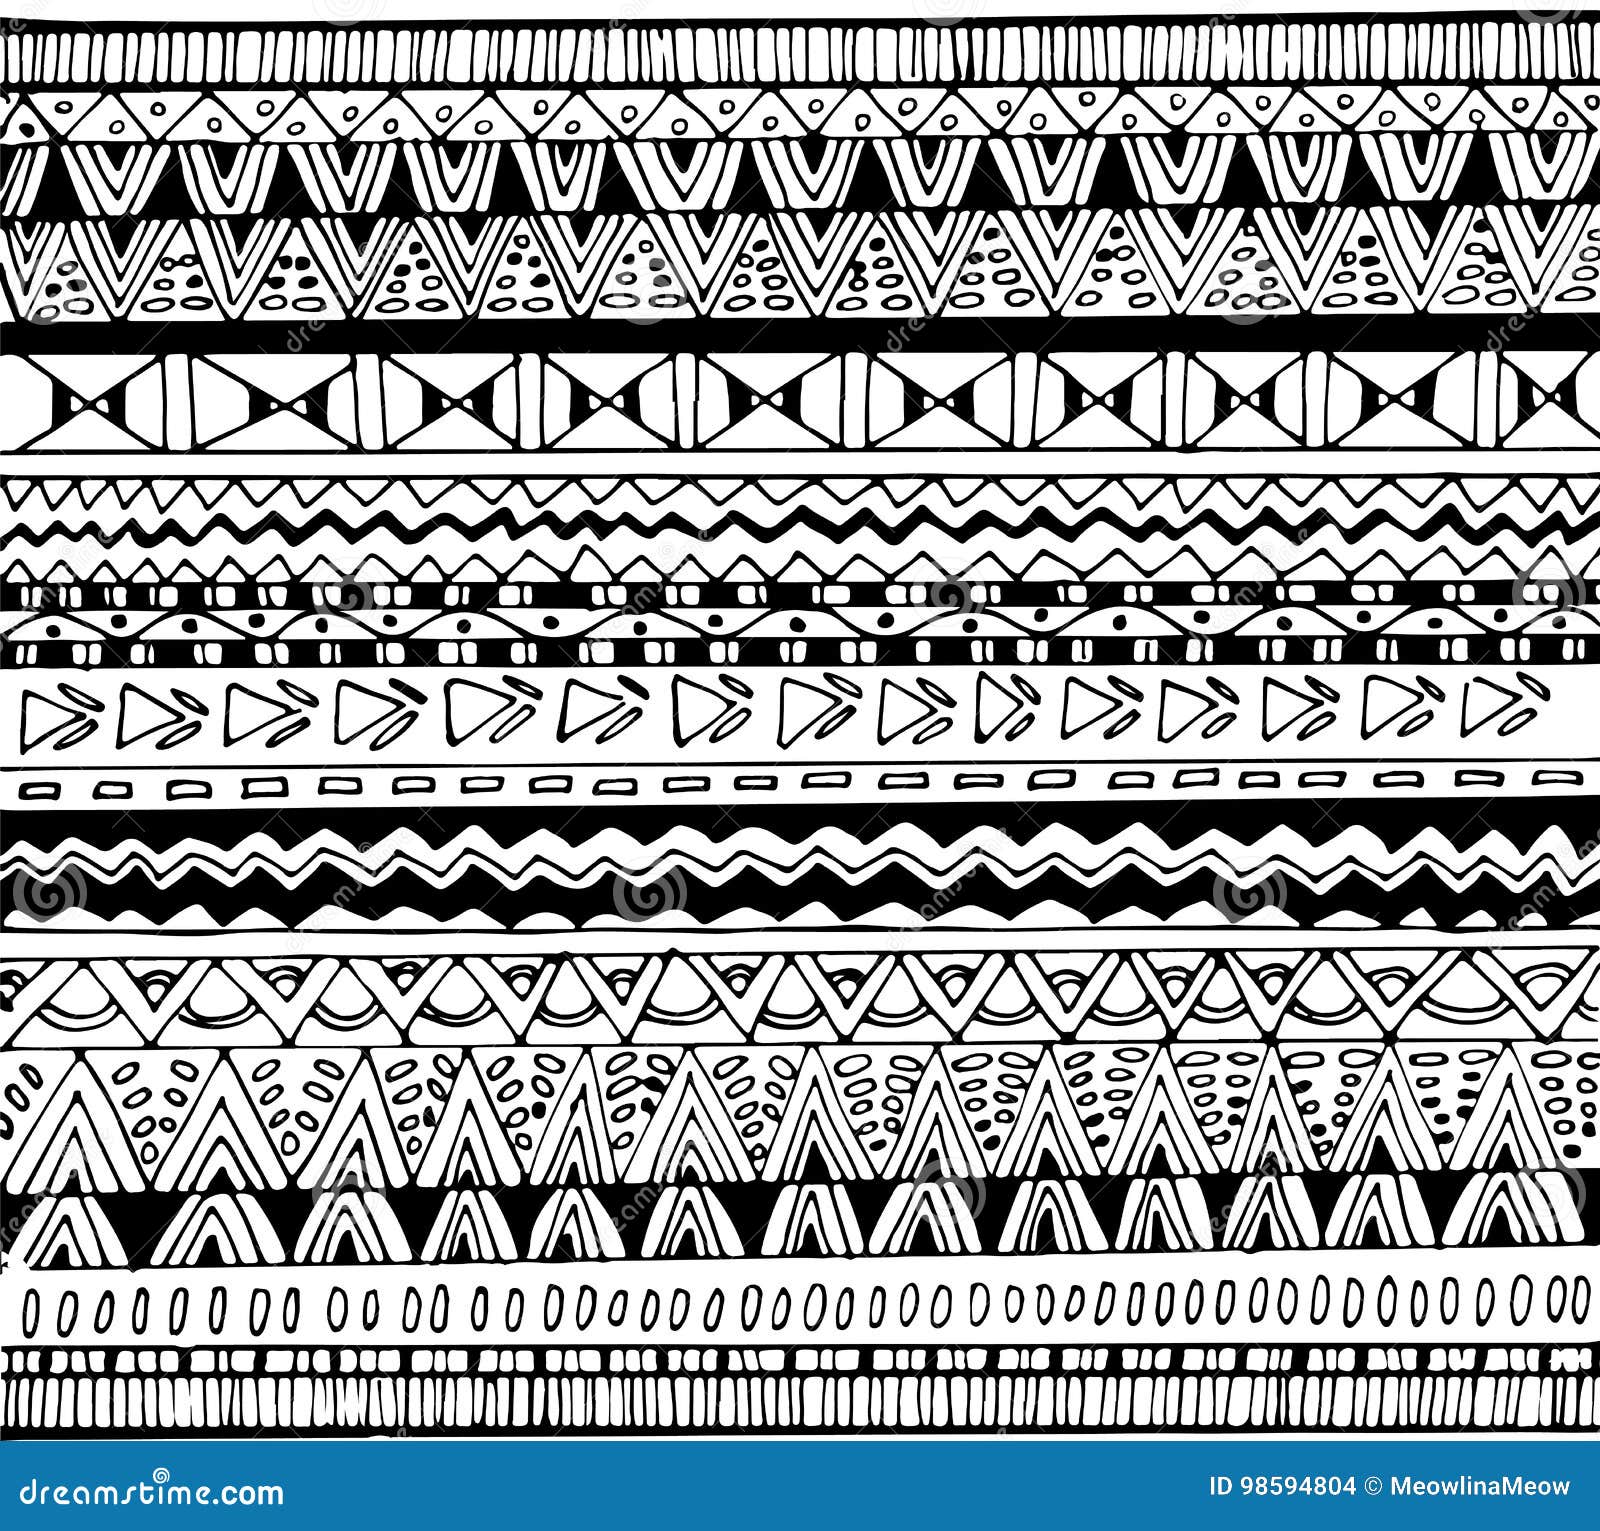 Black and White Tribal Seamless Pattern Stock Vector - Illustration of ...